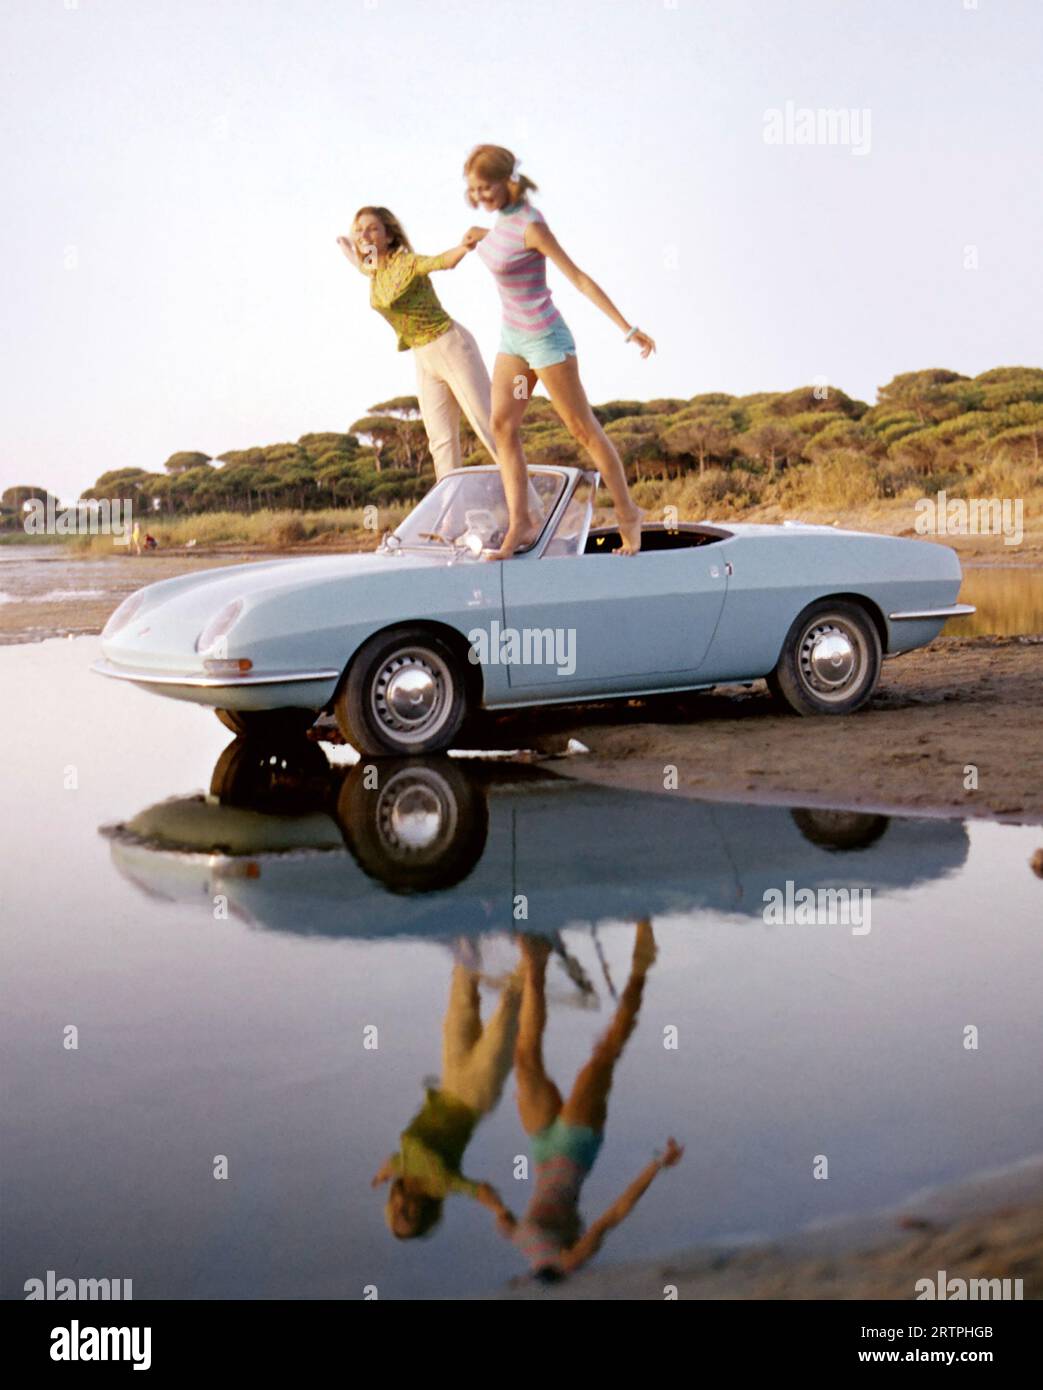 FIAT 850 SPIDER produced from 1964 to 1973. Stock Photo